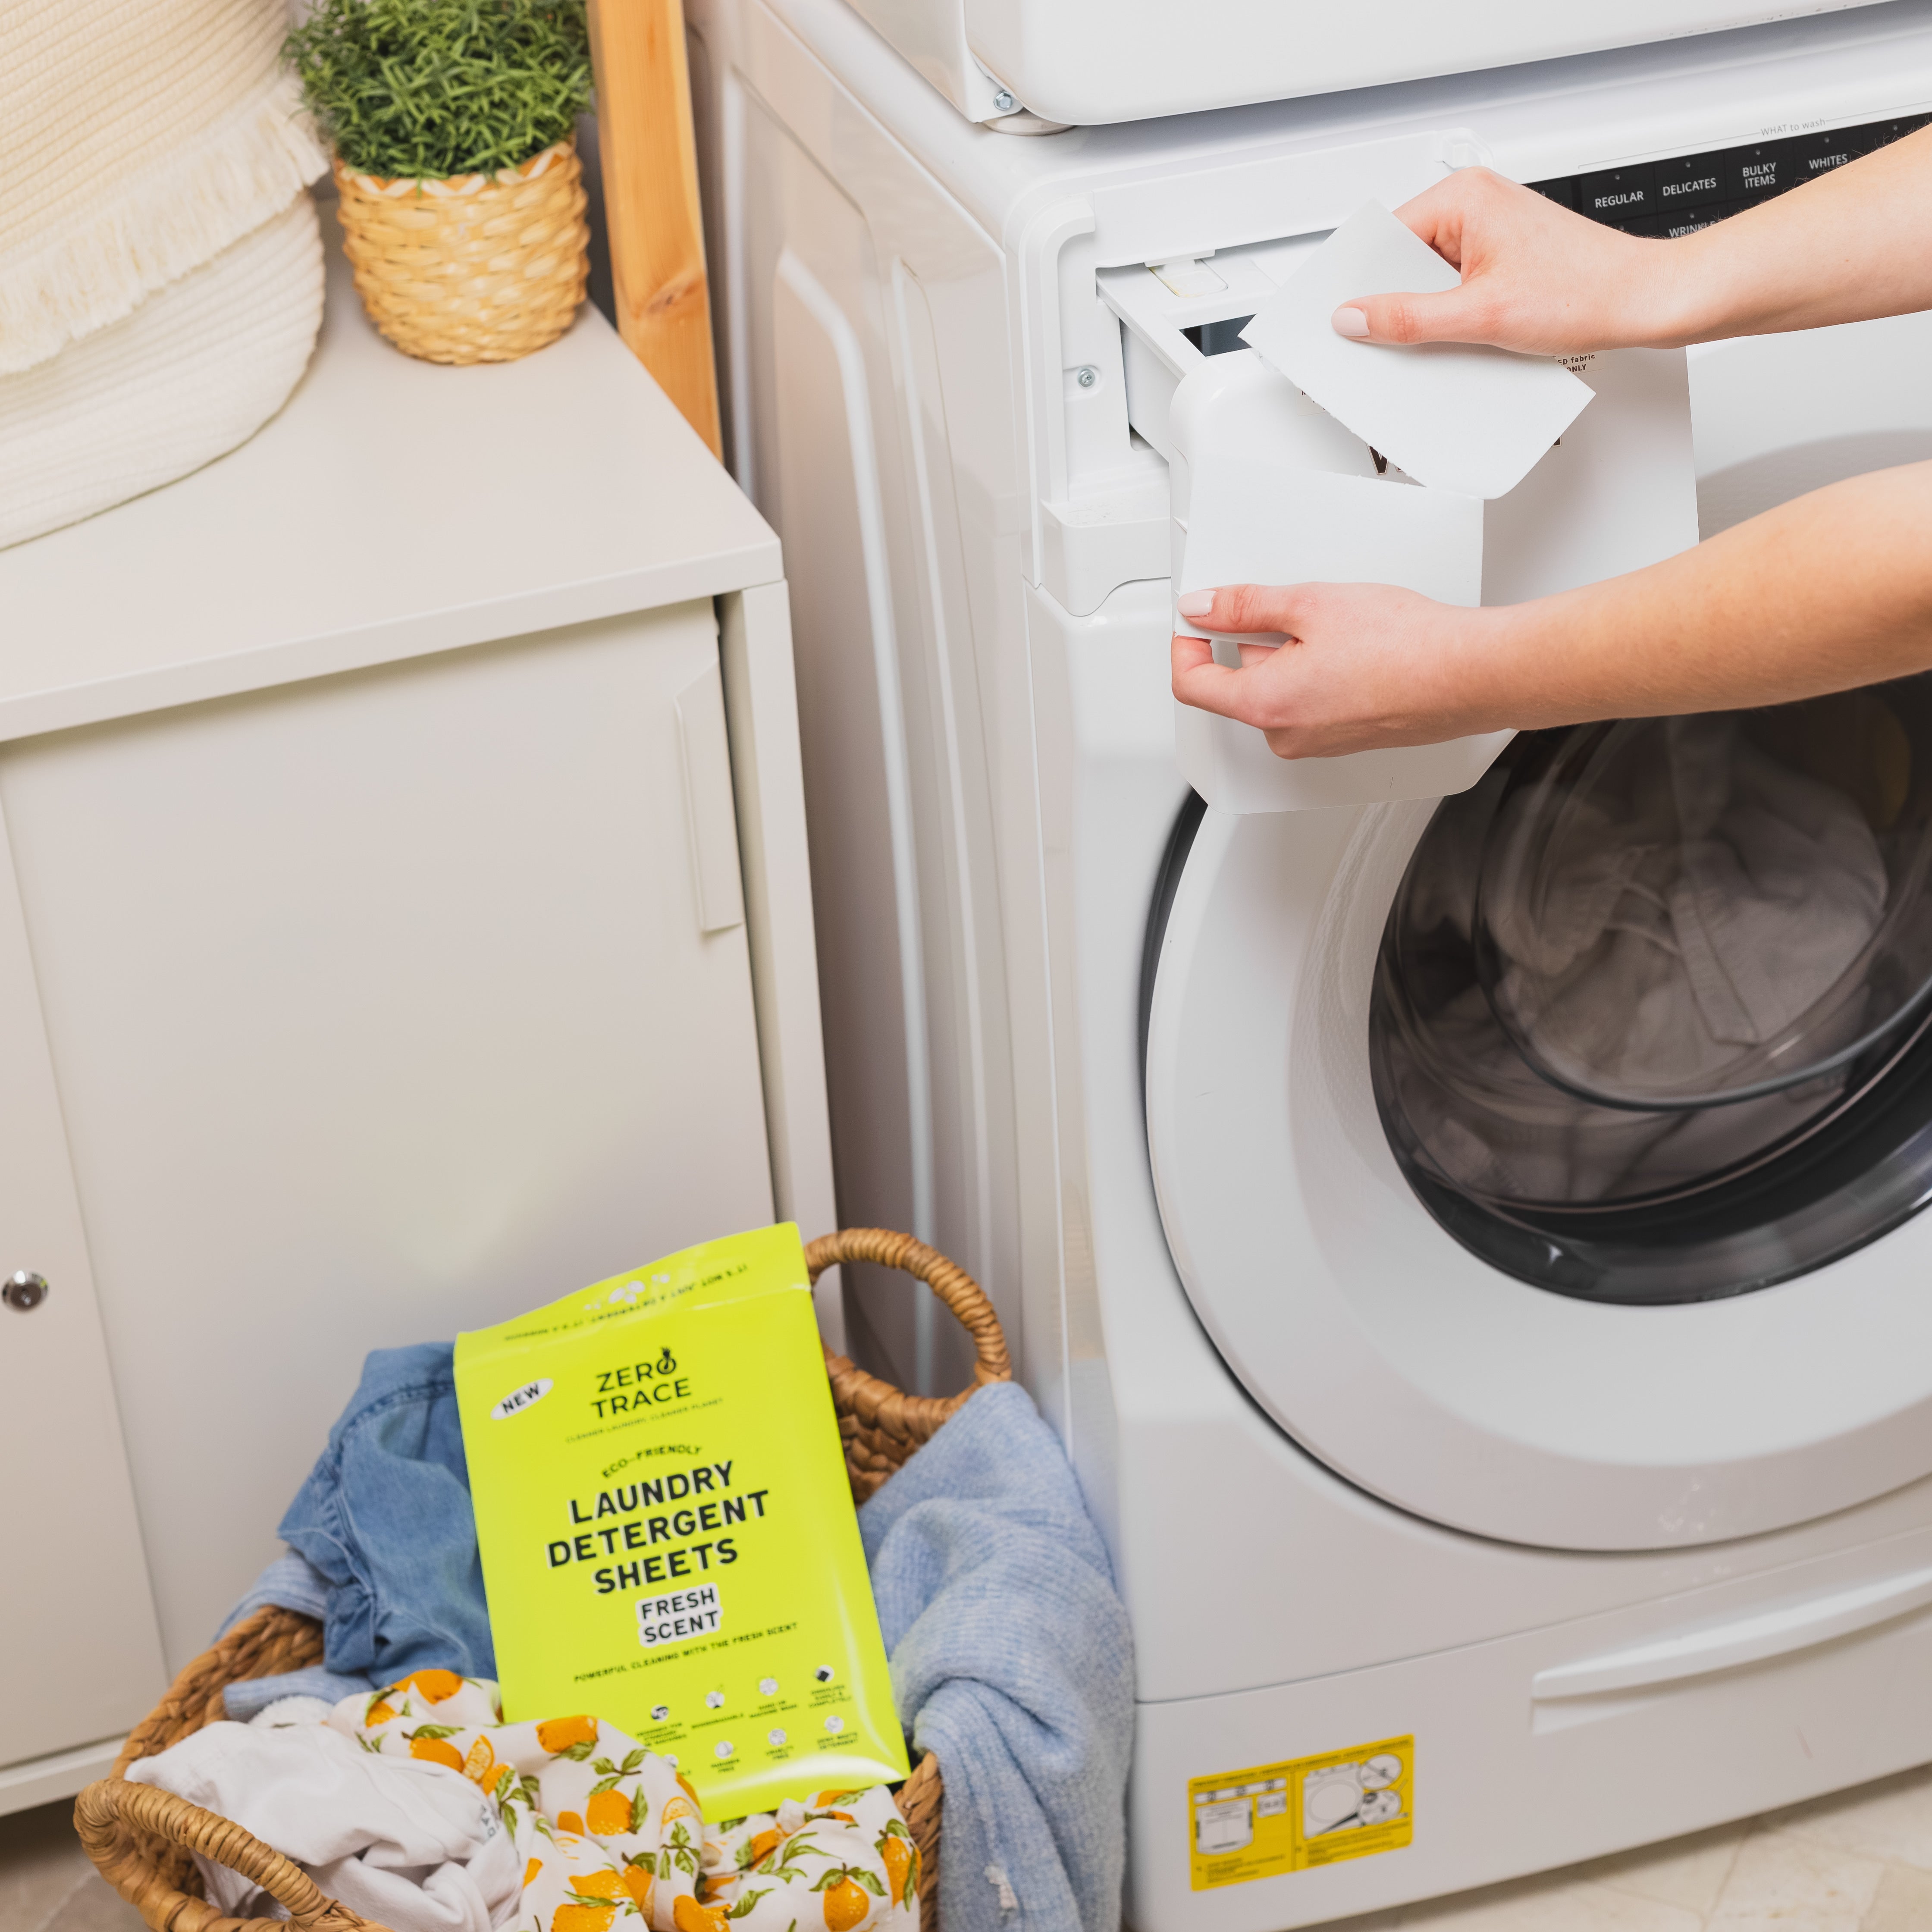 A woman is putting Zero Trace laundry detergent sheets into a washing machine.